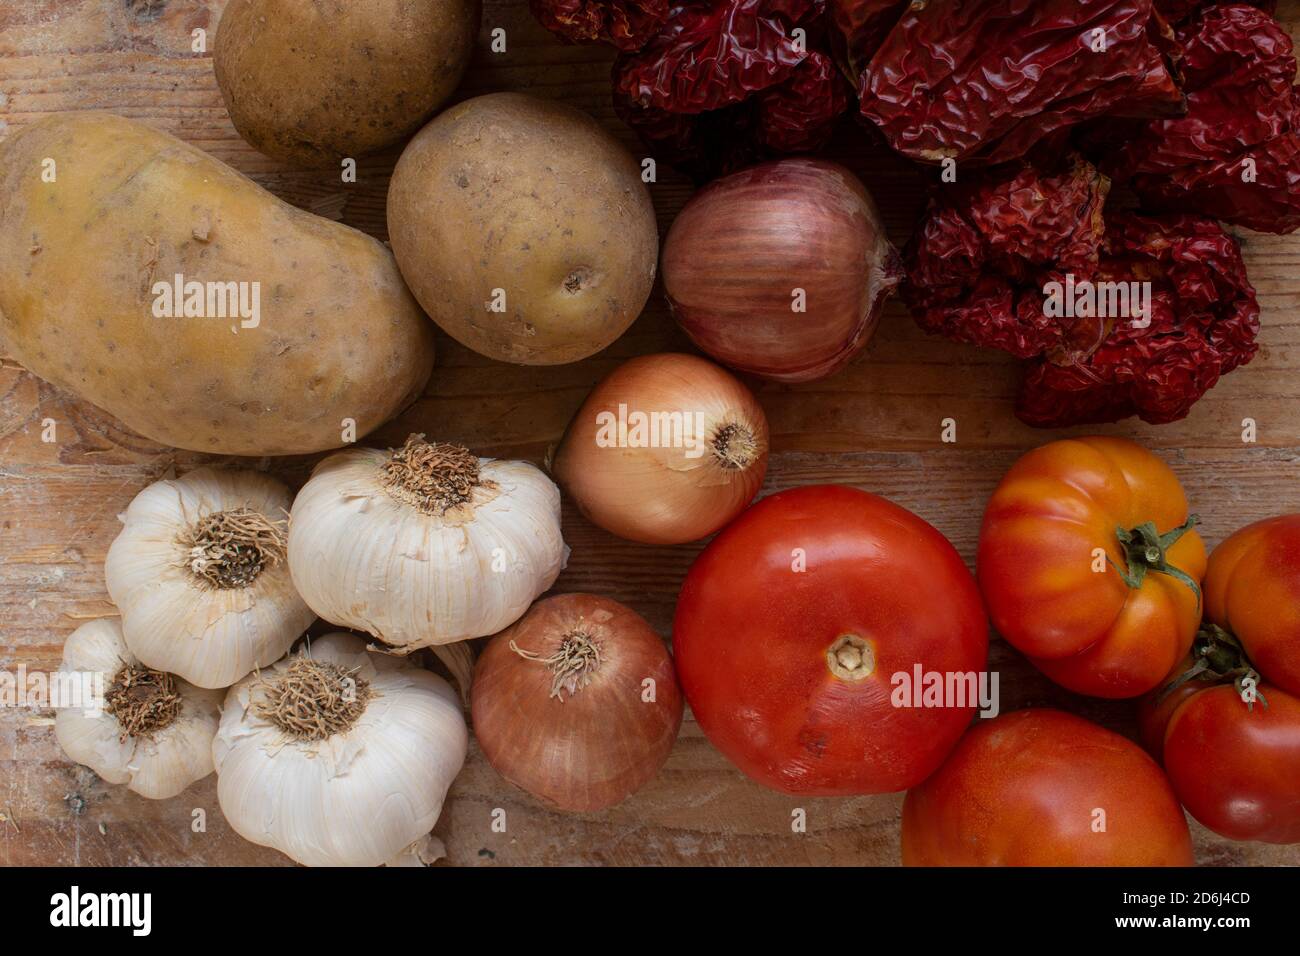 Food ingredients on traditional wooden background. Tomatoes, potatoes, onions, garlic and dried peppers. Stock Photo